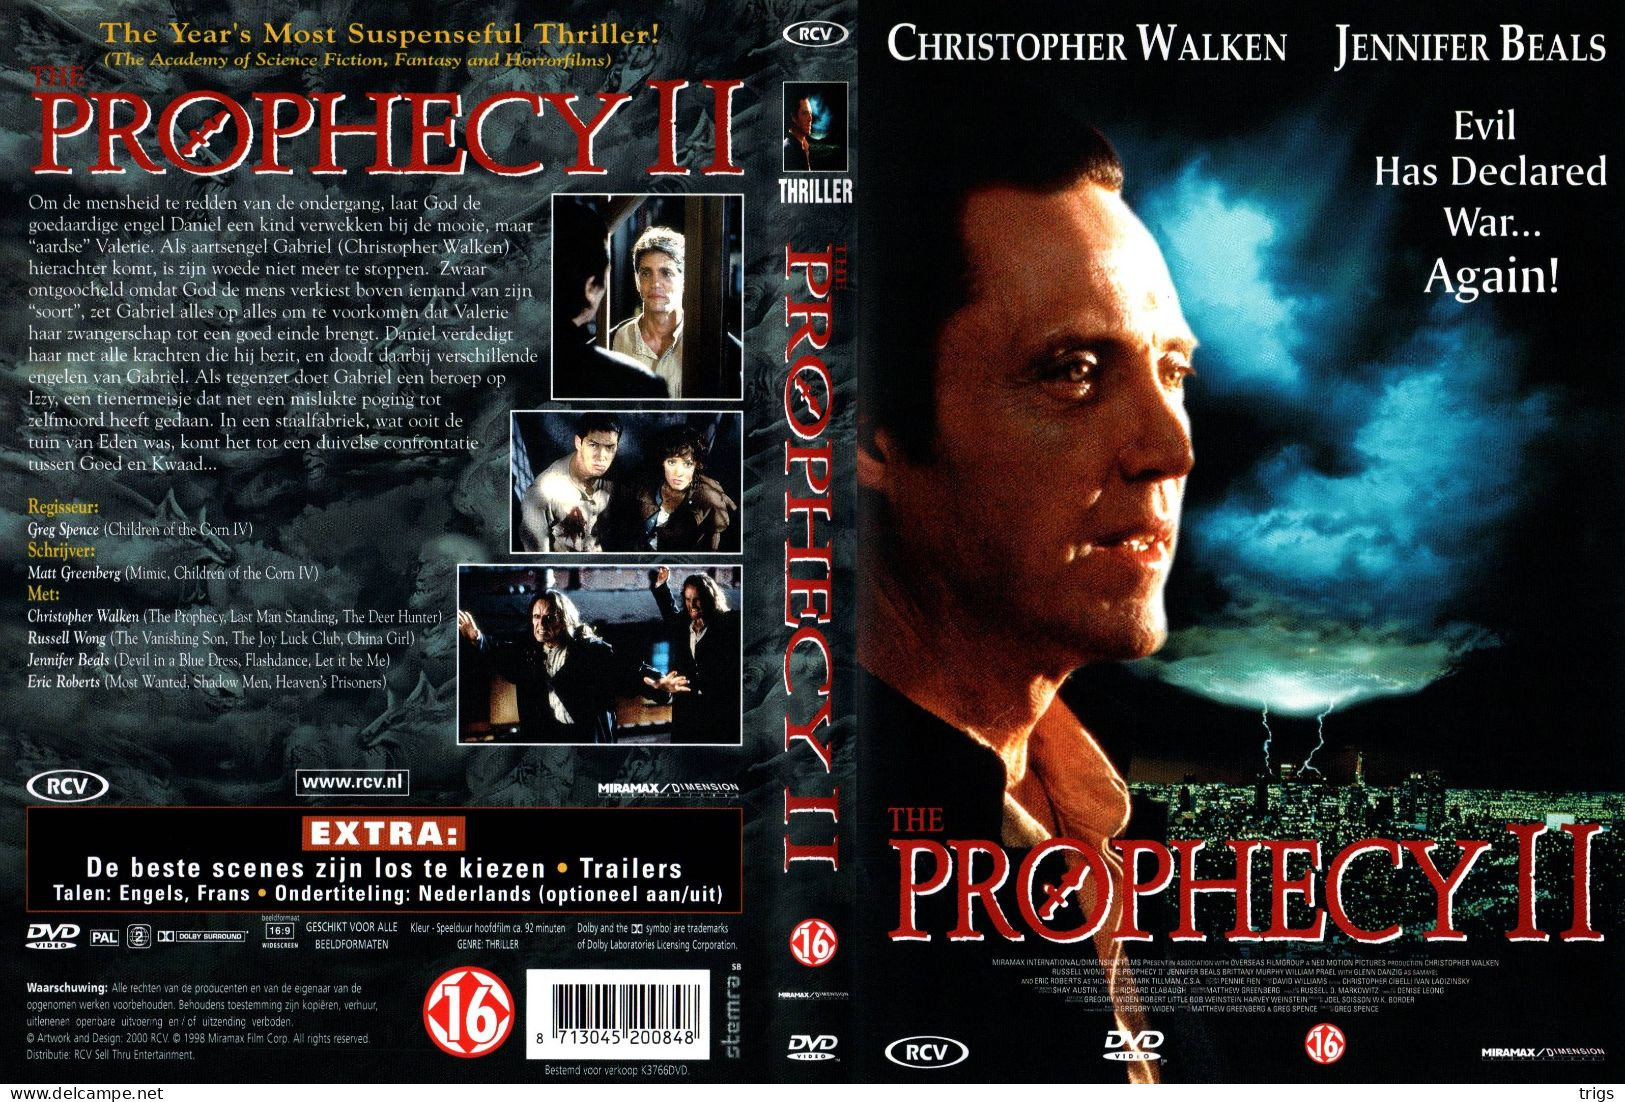 DVD - The Prophecy II - Crime